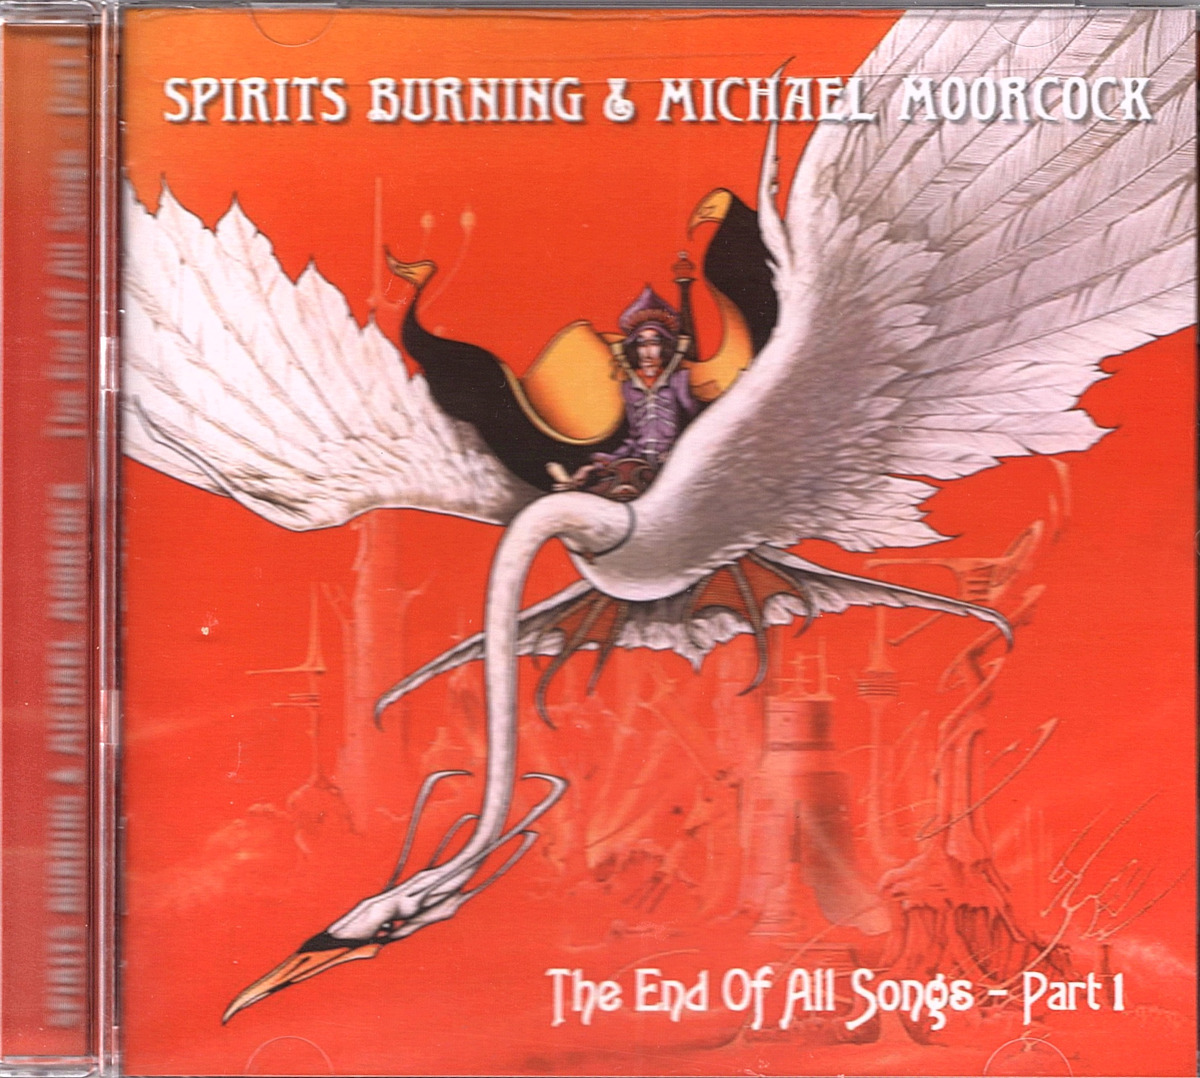 SPIRITS BURNING & MICHAEL MOORCOCK / THE END OF ALL SONGS part1